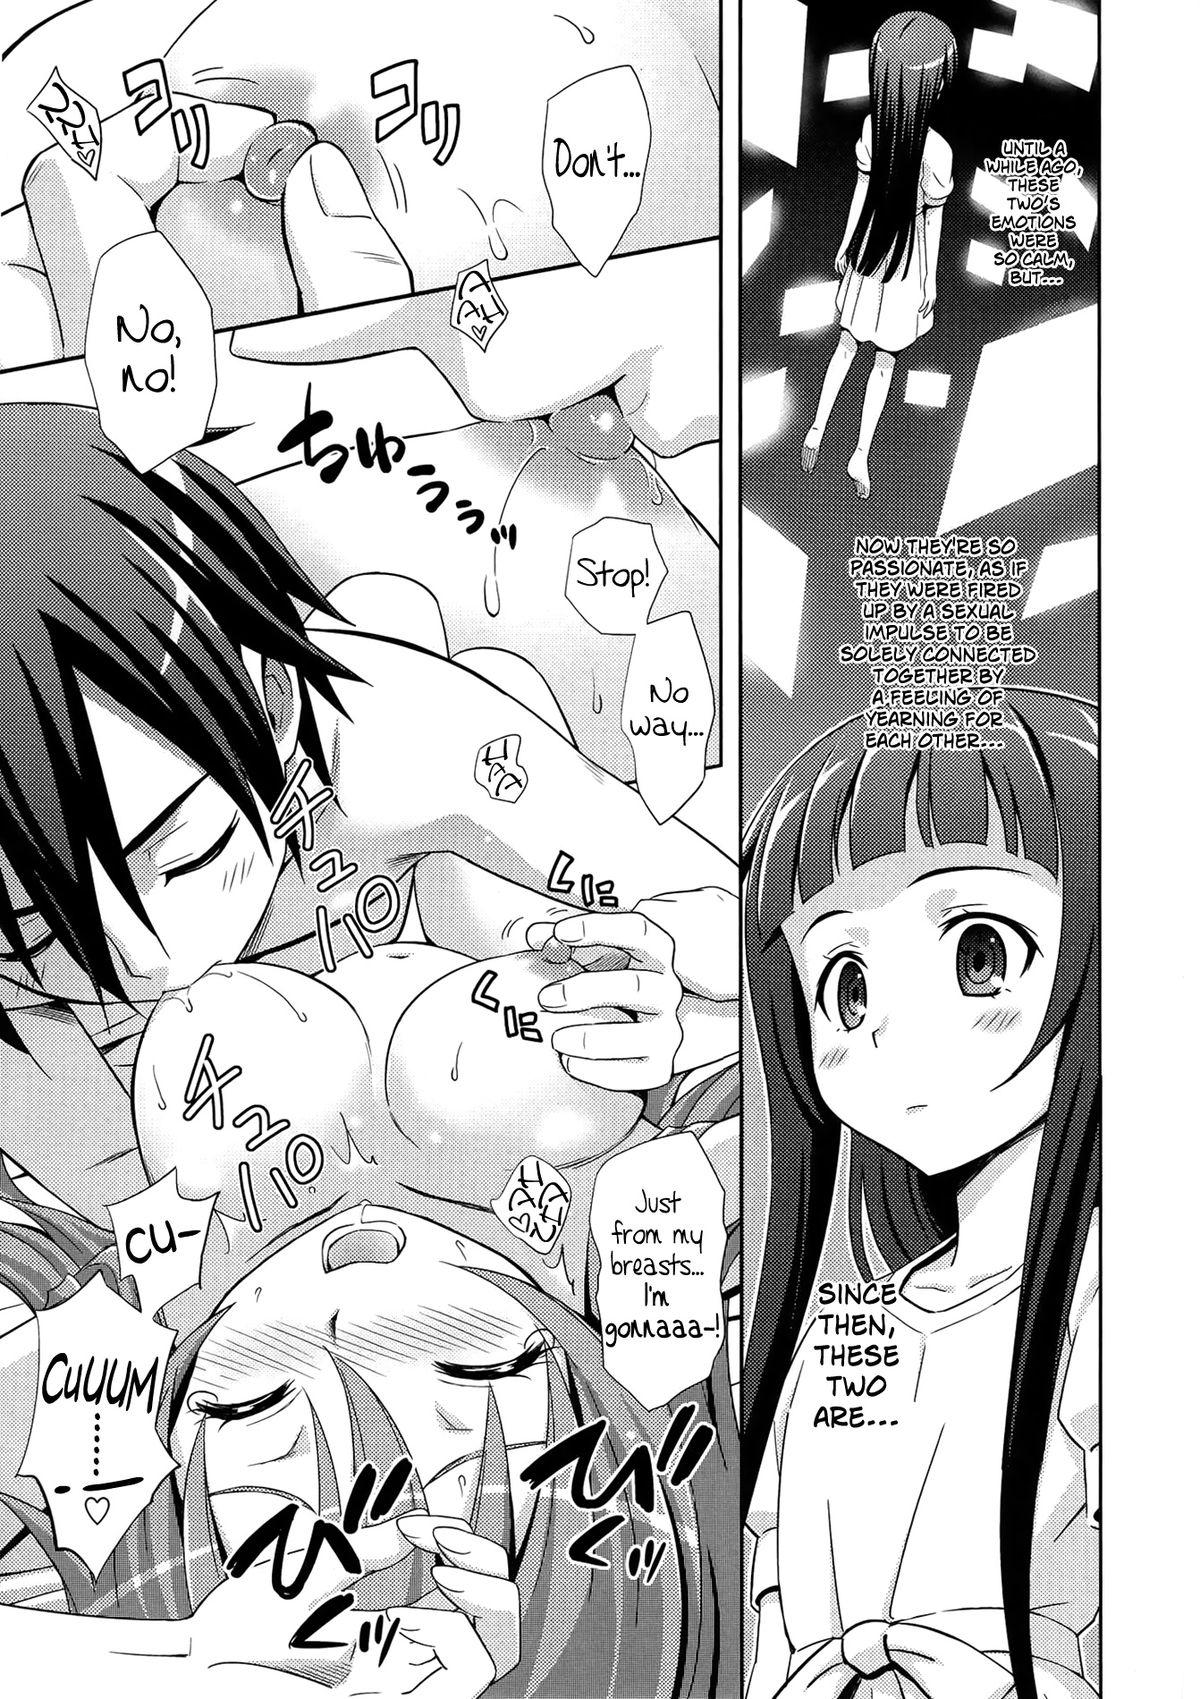 Maid LOVE BIRDS - Sword art online Pussy Eating - Page 8